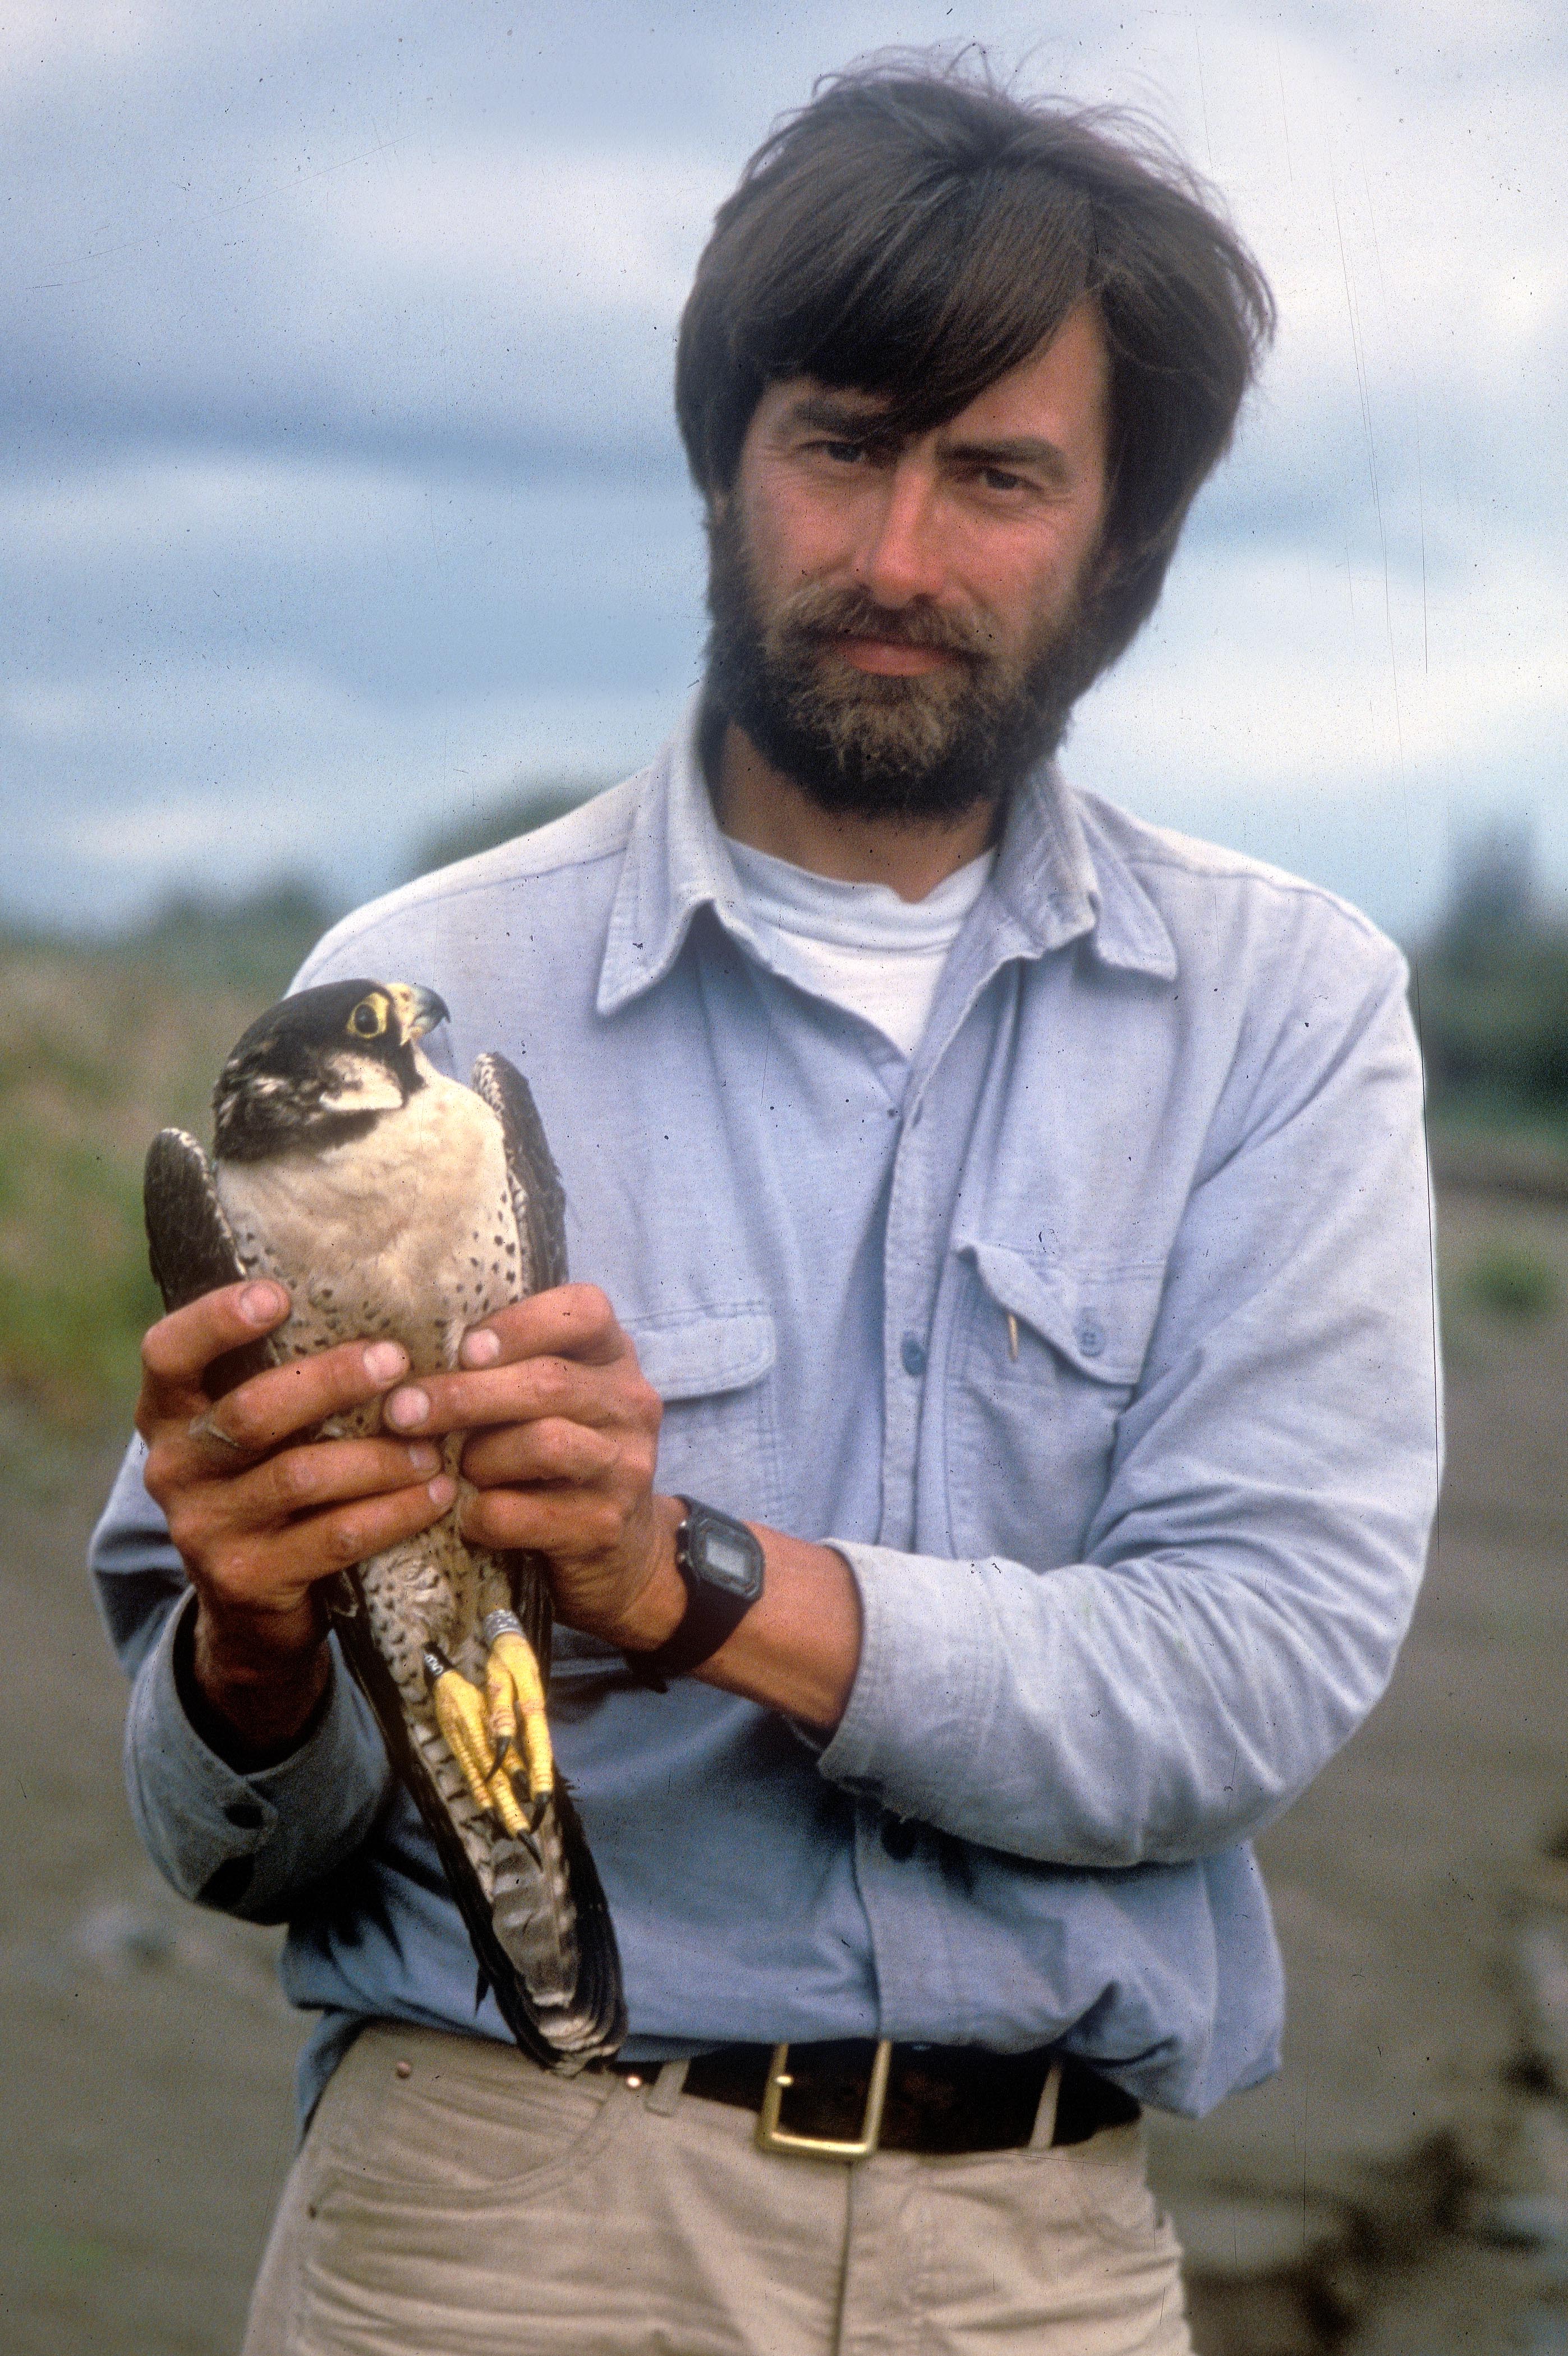 A bearded man looks into the camera. He is holding a peregrine falcon with both hands as the bird gazes back at him.